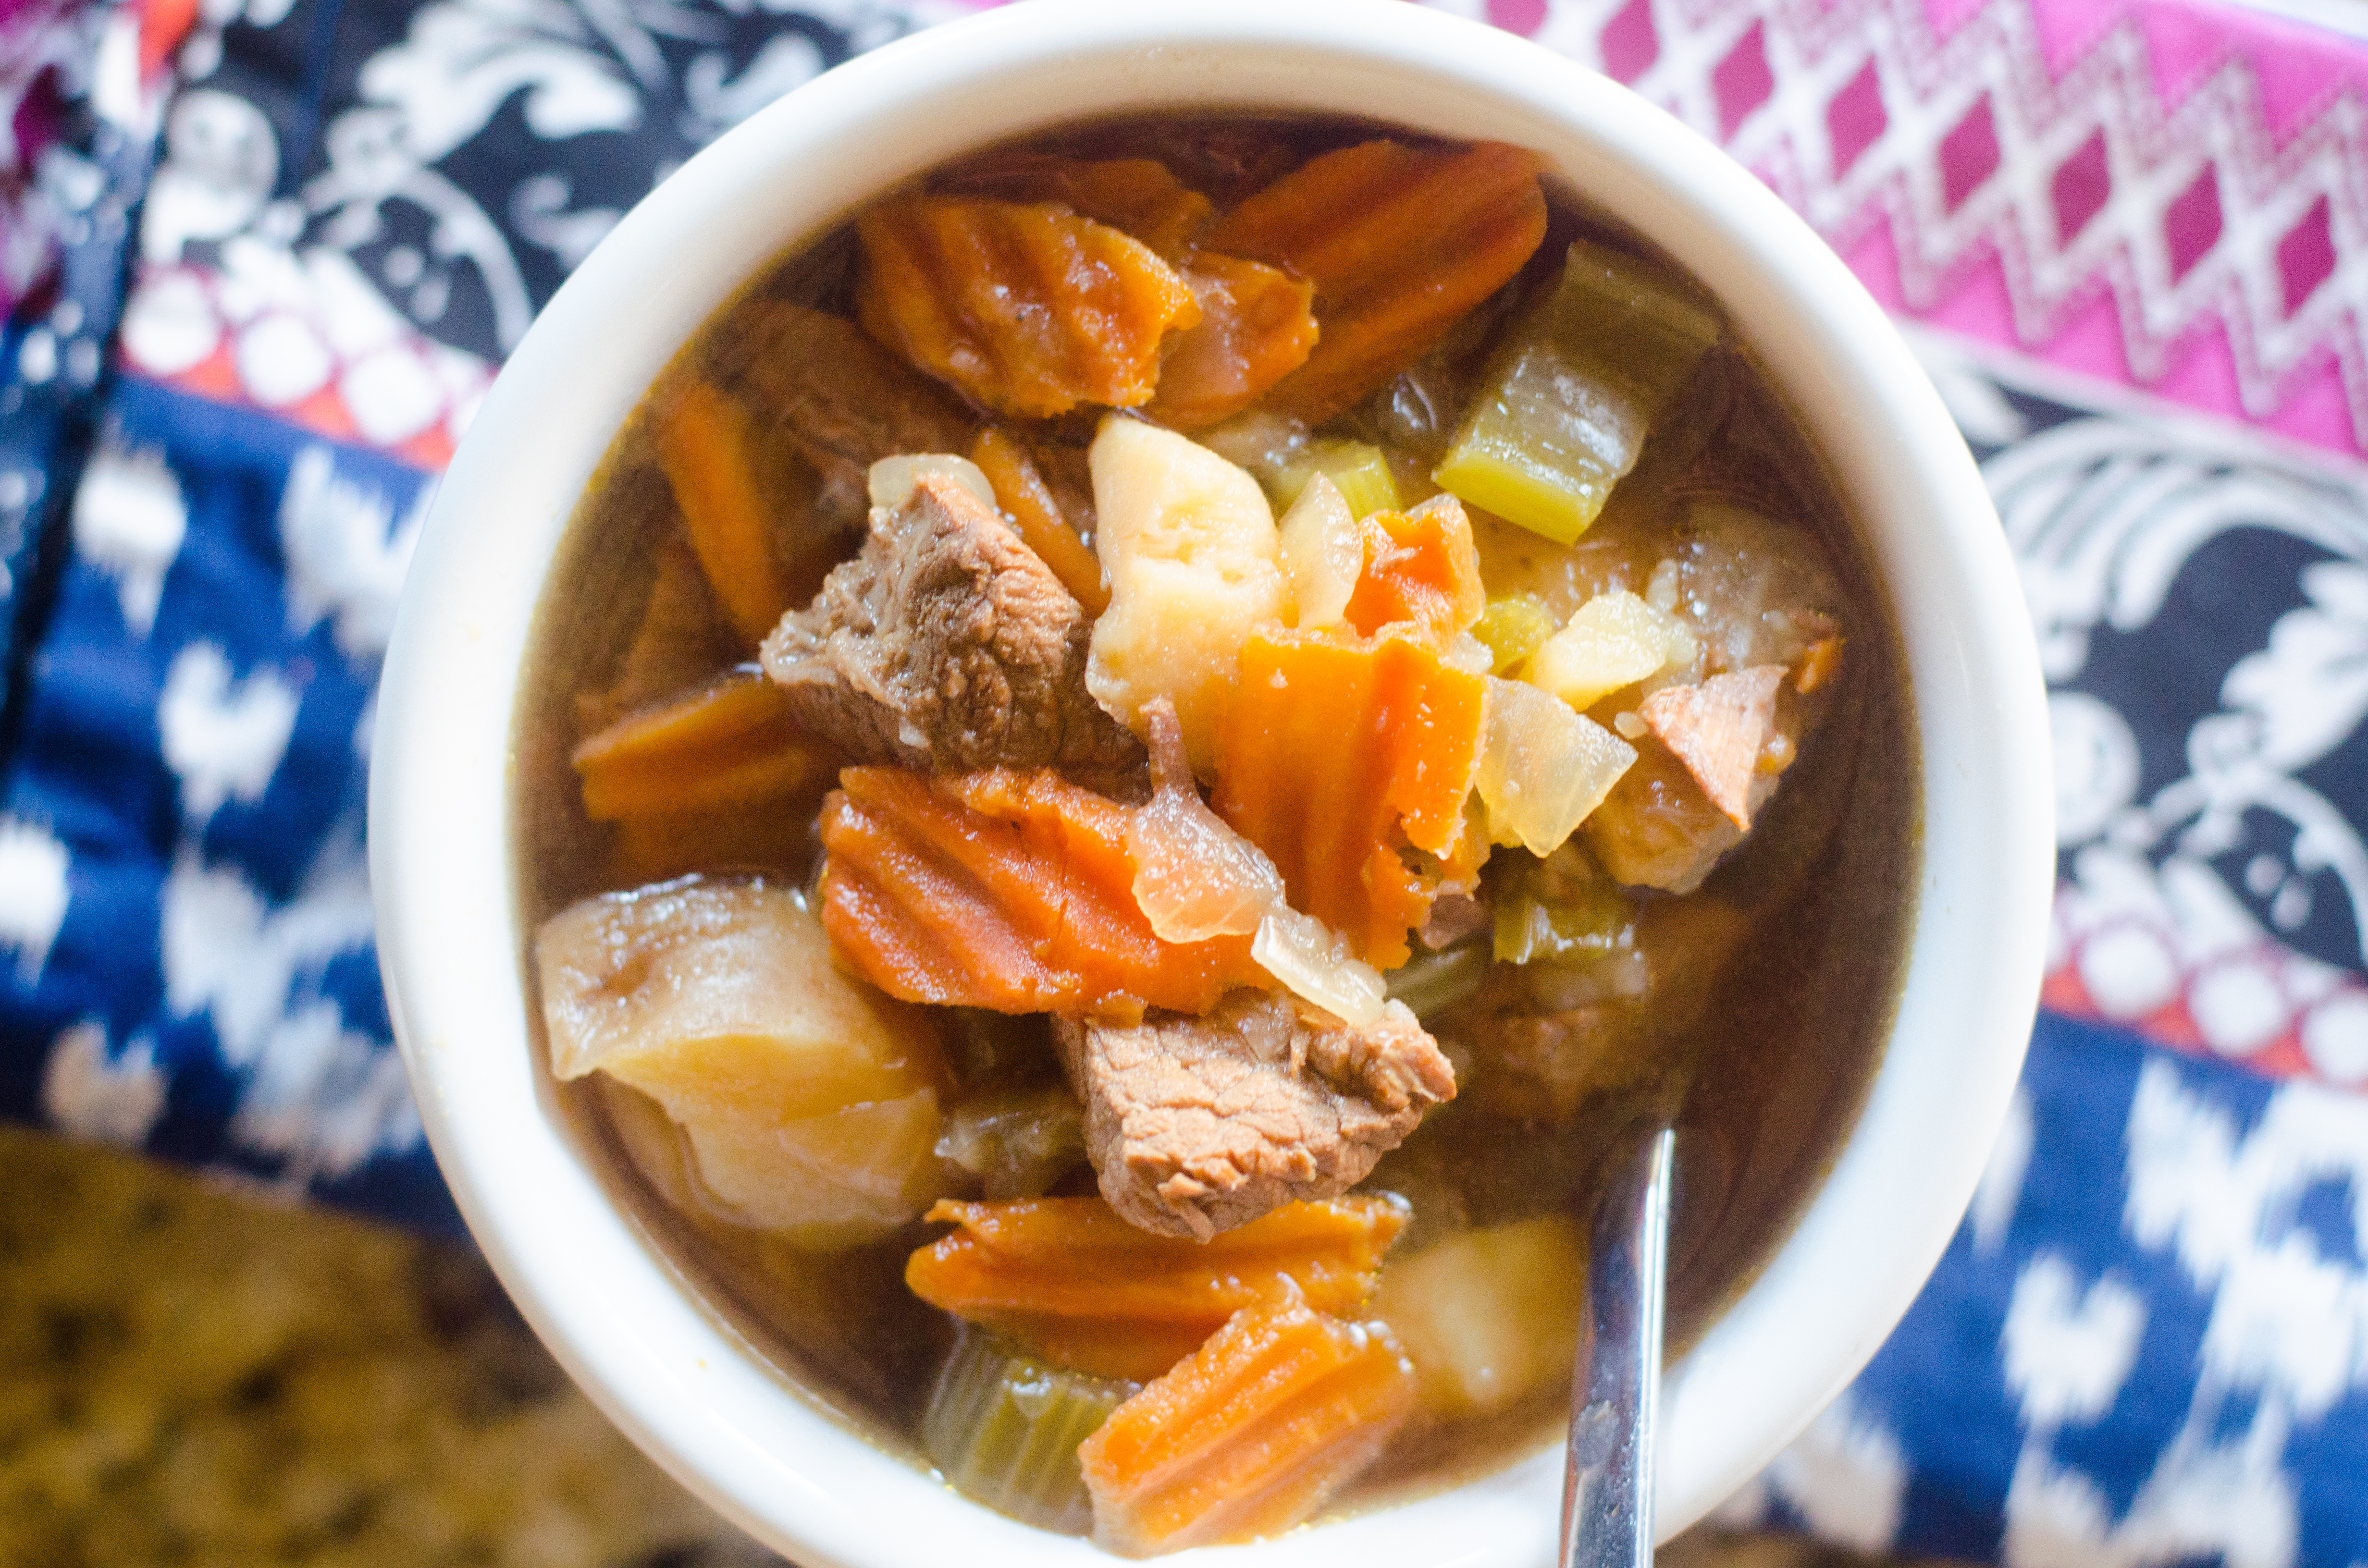 Looking for a great tasting Instant Pot recipe? This fast weeknight dinner, Instant Pot Beef Stew, is perfect for those busy weeknight meals. This can easily be a pressure cooker beef stew recipe.